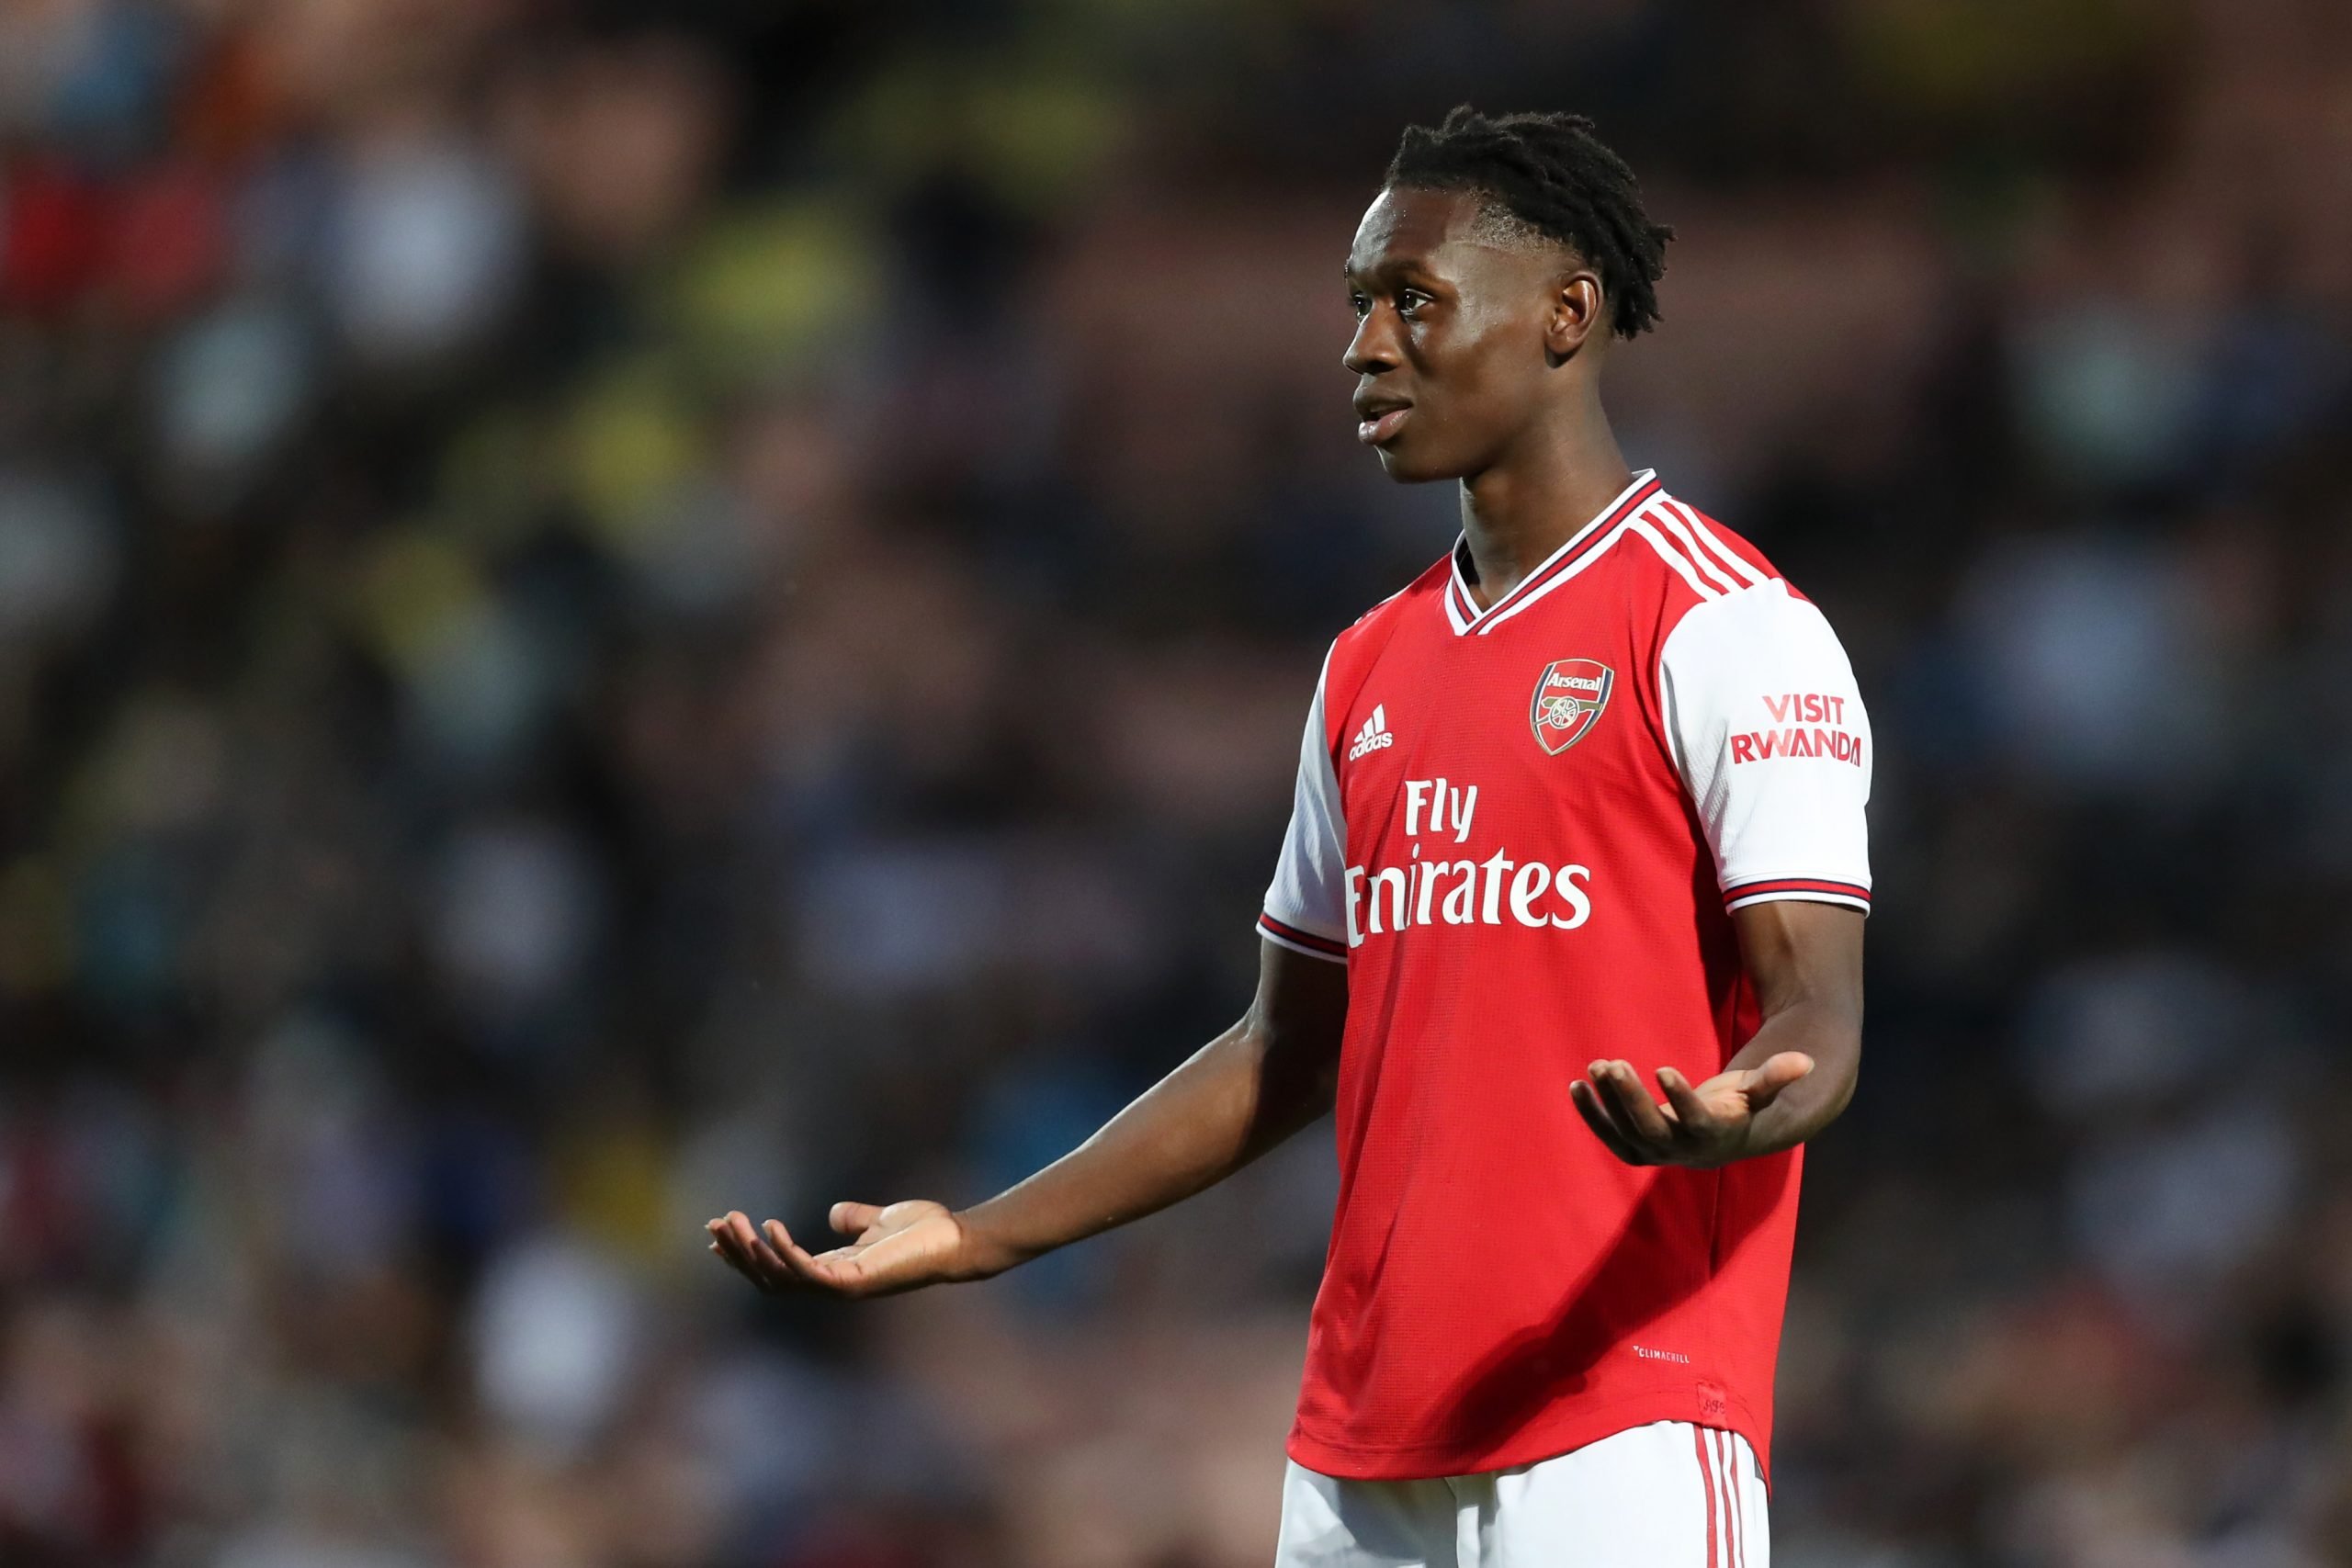 Arsenal have begun talks with Folarin Balogun over a new contract - Is it the right move?